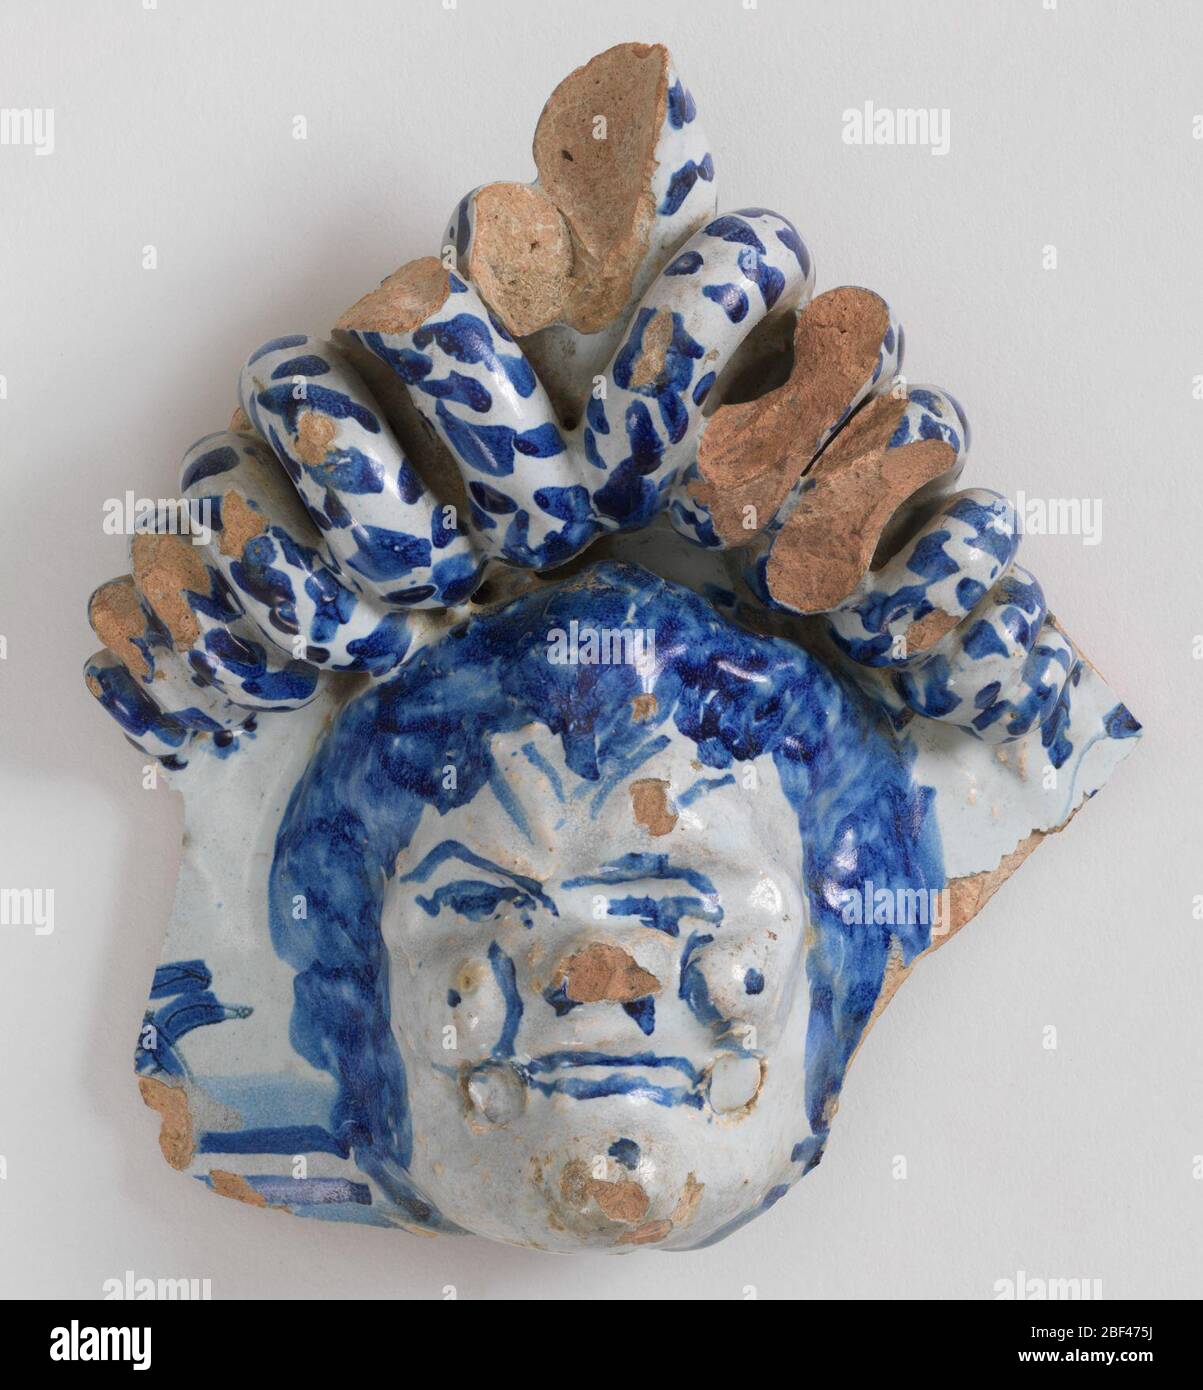 Fragment. Mascaron, crowned with coiled serpents. Pale blue glaze over pink earthenware body, with details in dark cobalt. Stock Photo